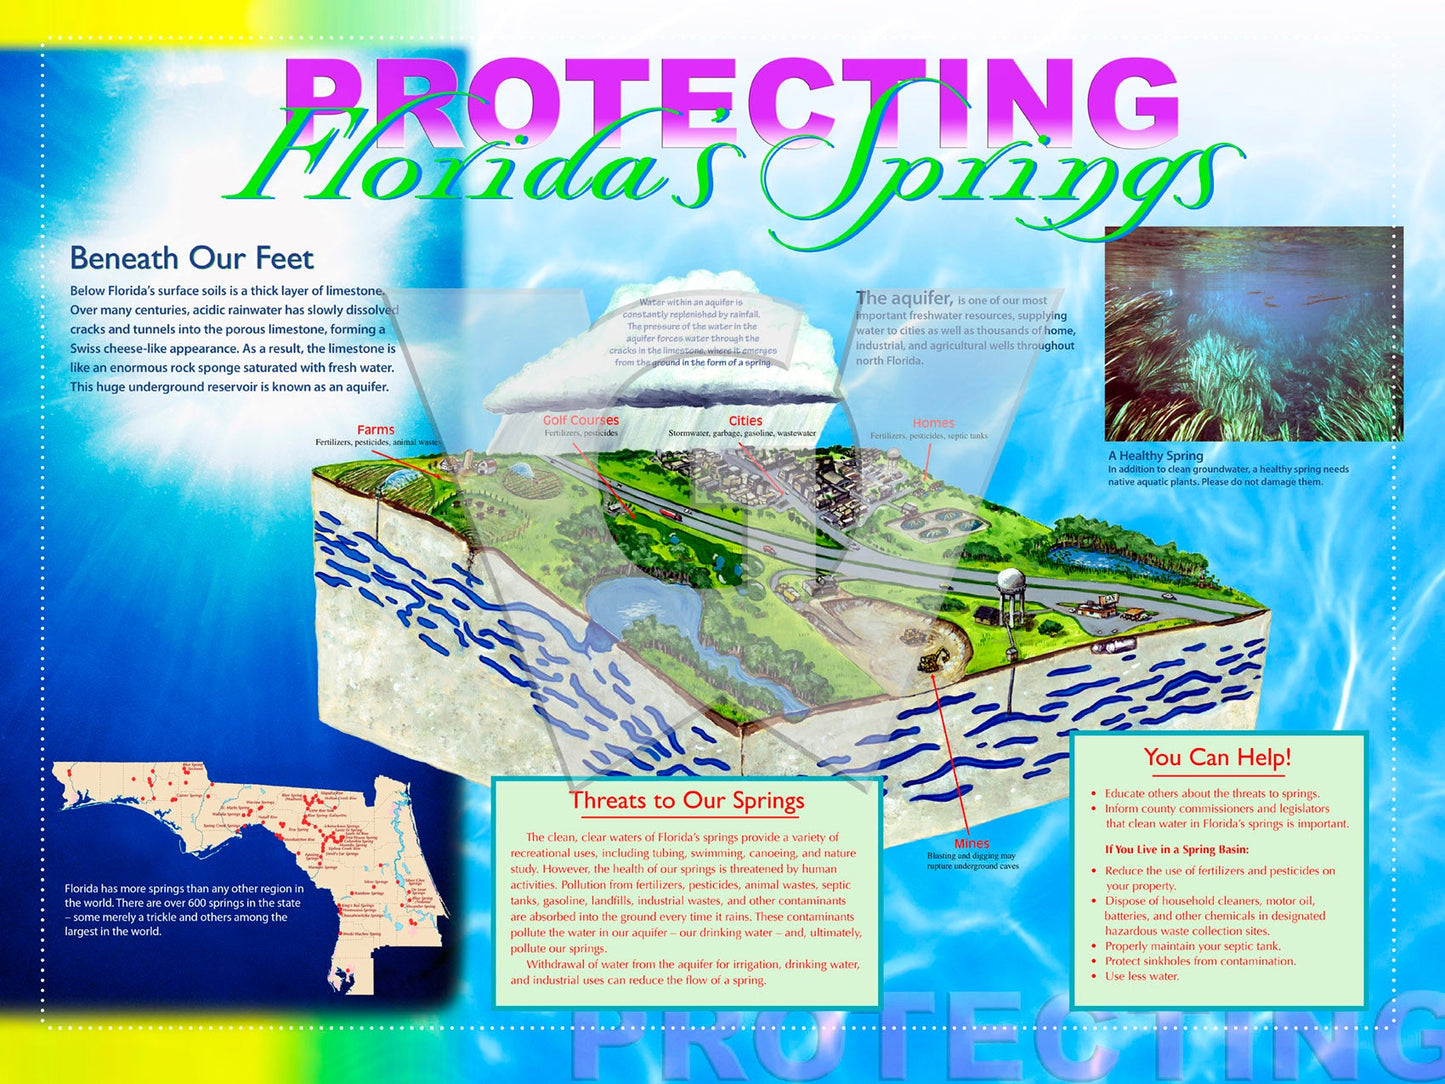 Protecting Florida's Springs